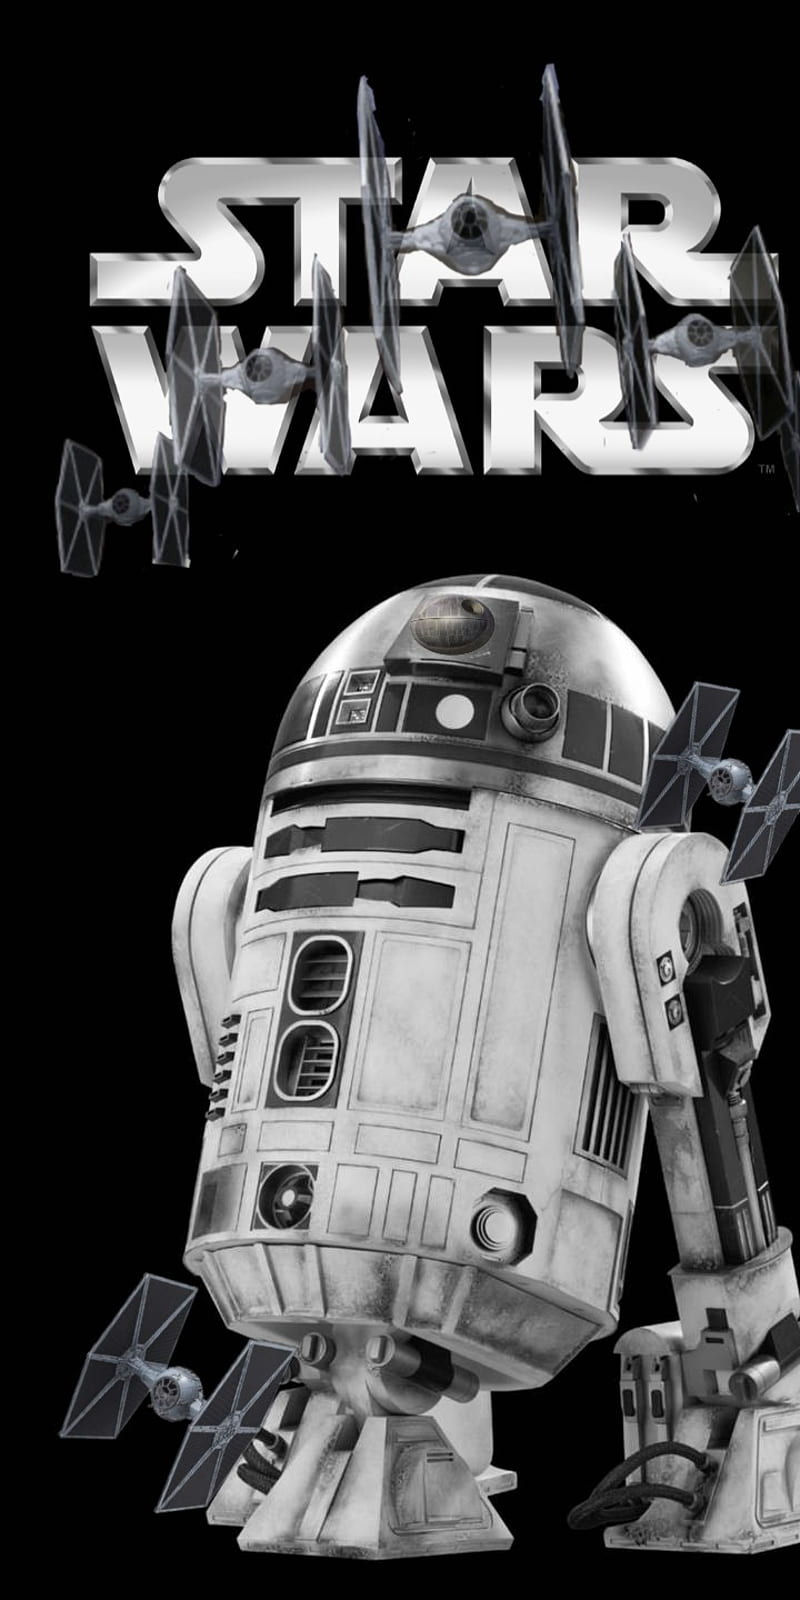 R2D2 wit Tie Fighter, black and white, r2d2, star wars logo, tie fighters, HD phone wallpaper